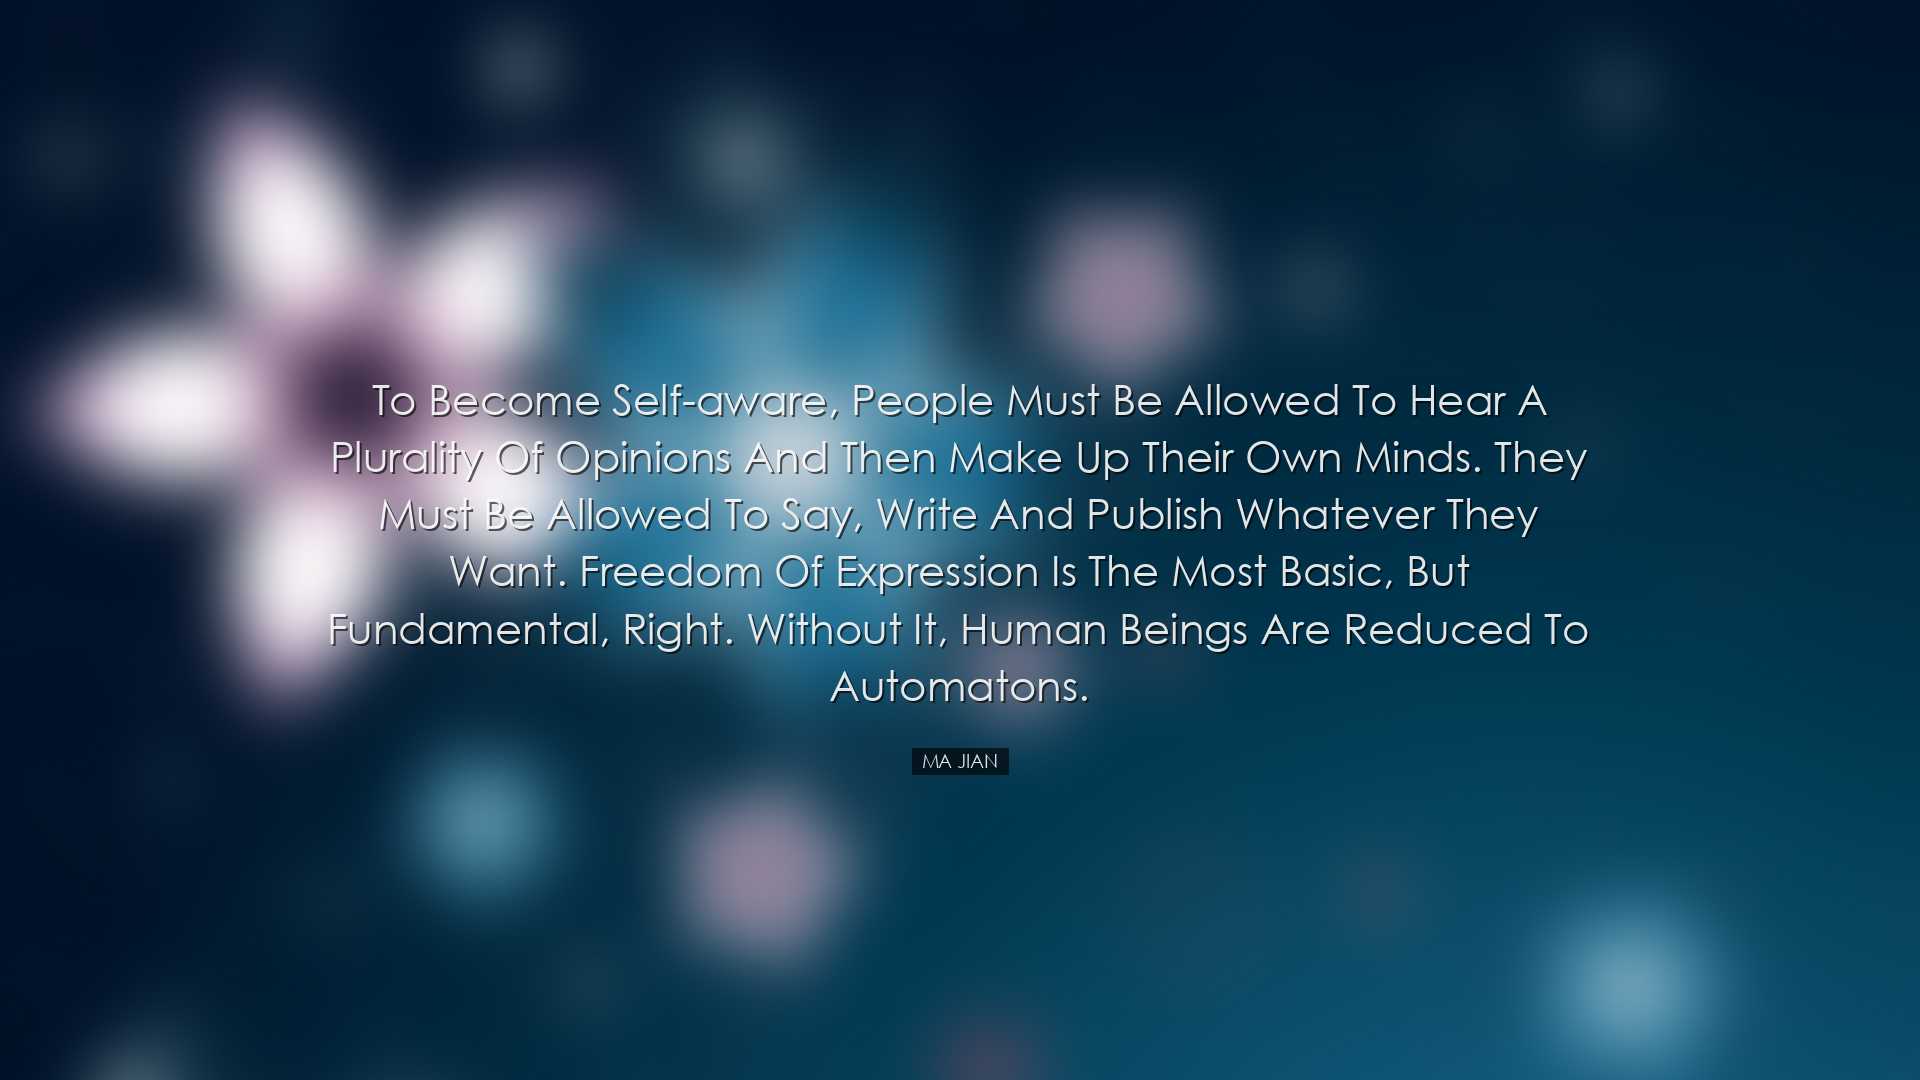 To become self-aware, people must be allowed to hear a plurality o